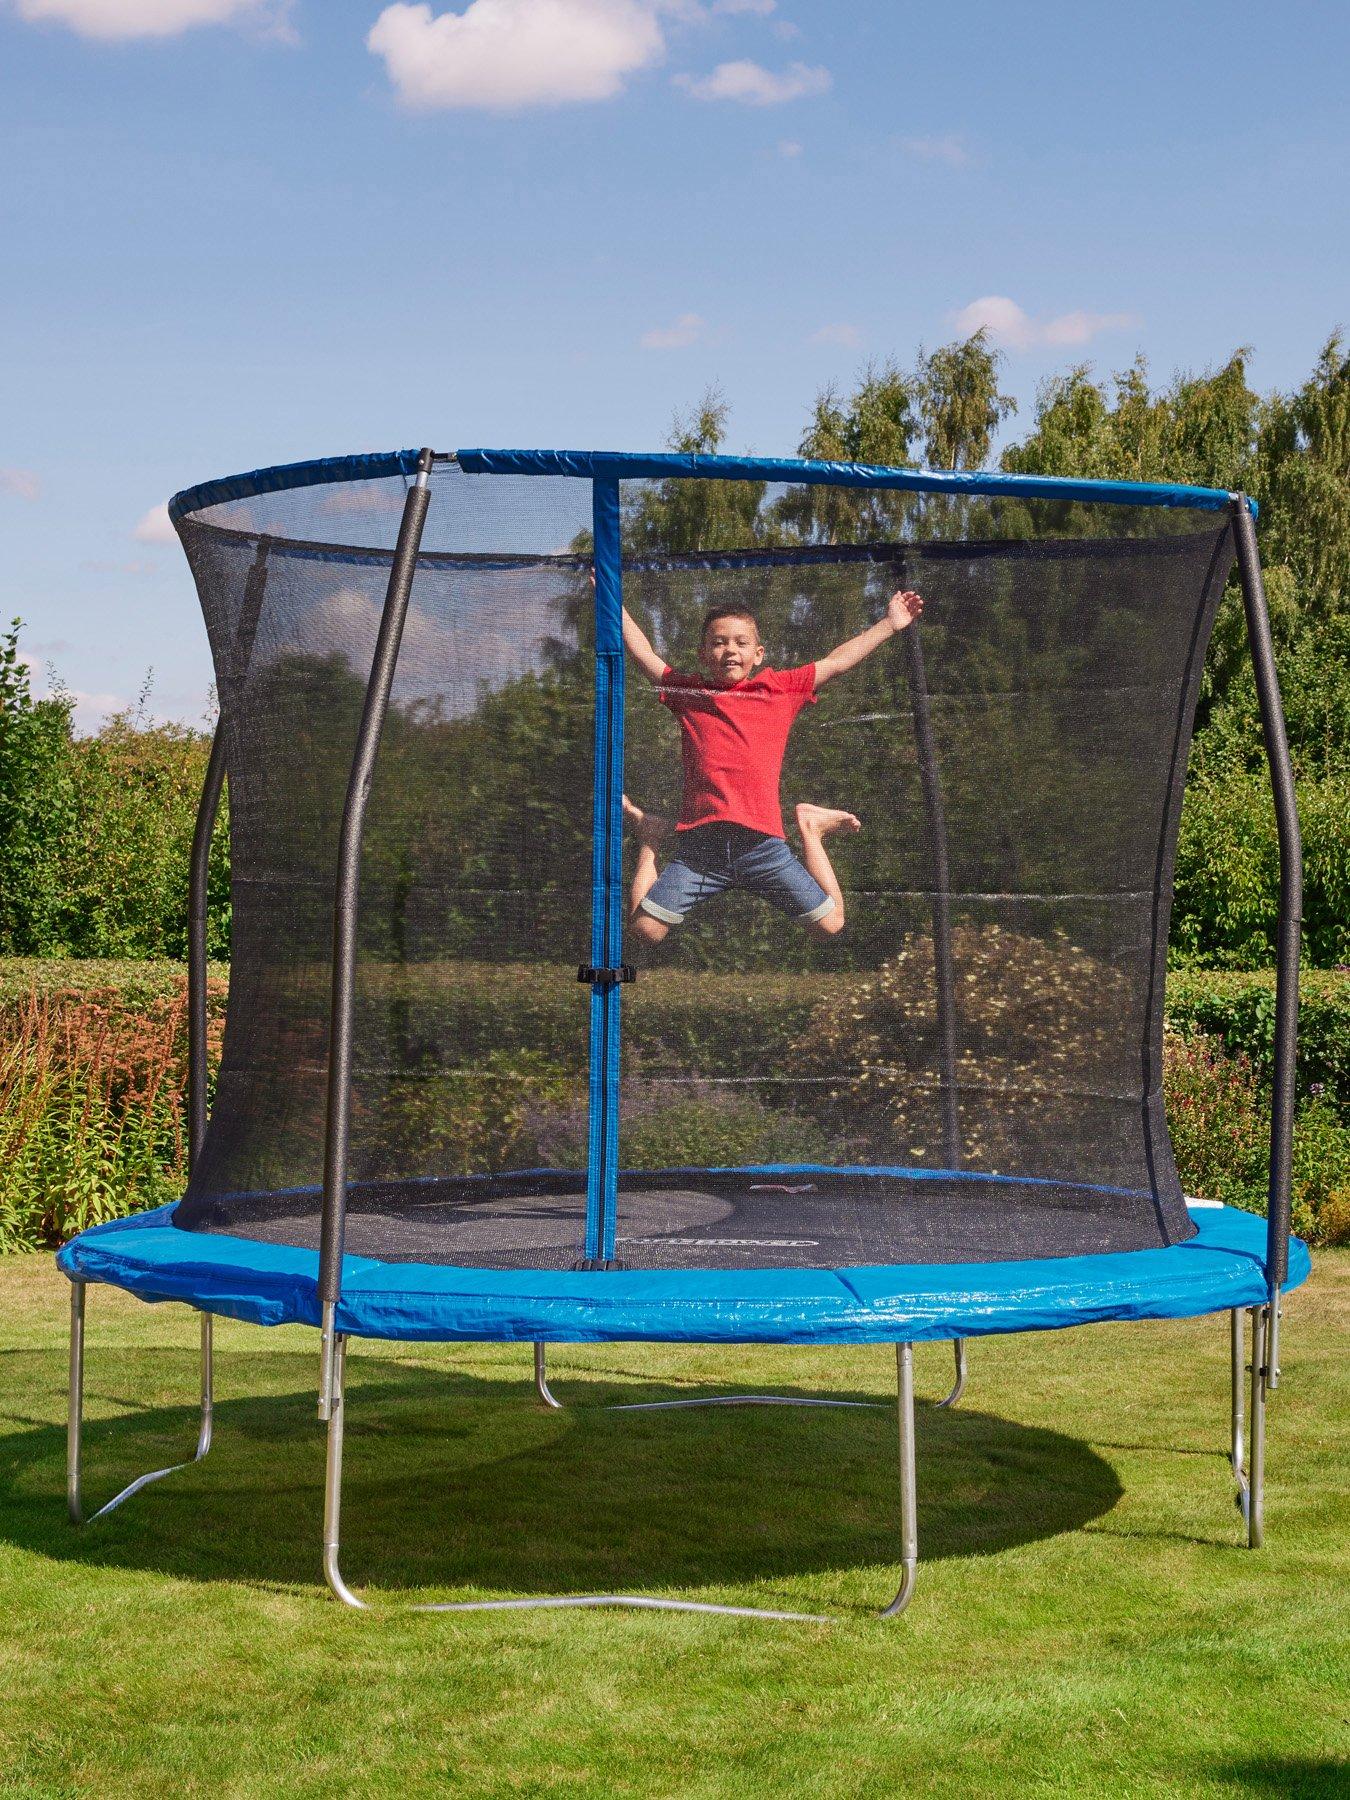 10 Ways to Reduce the Risk of Trampolines